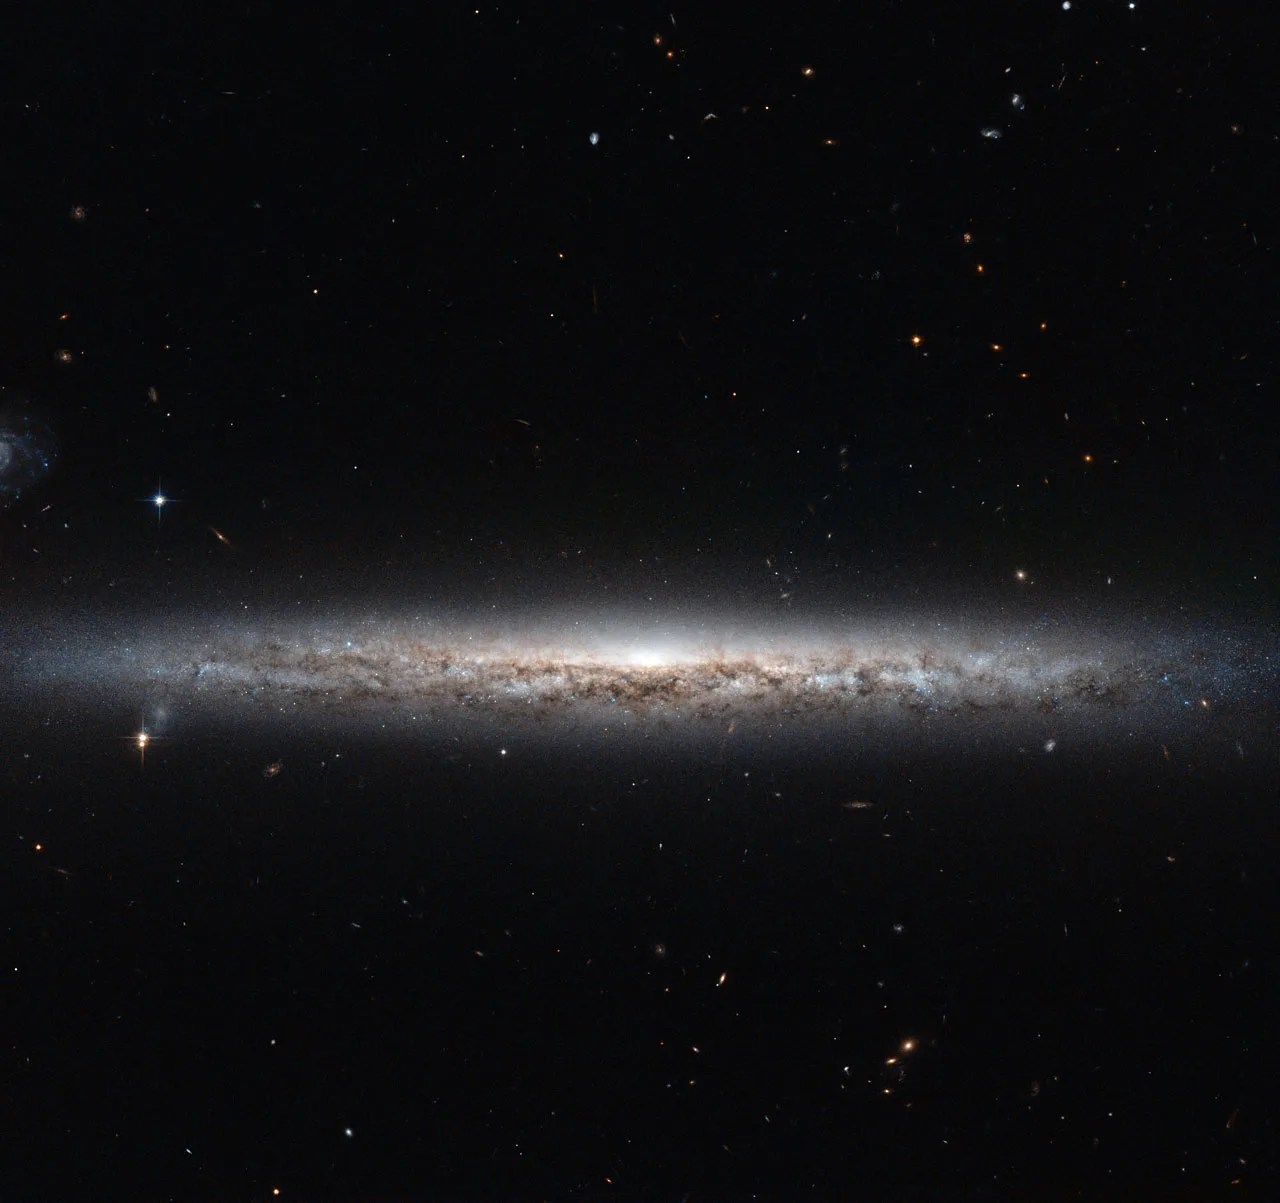 Looking into the disk of a galaxy, we see a glowing white center and billions of stars, with streaks of reddish-brown gas and dust. All against the black backdrop of space.